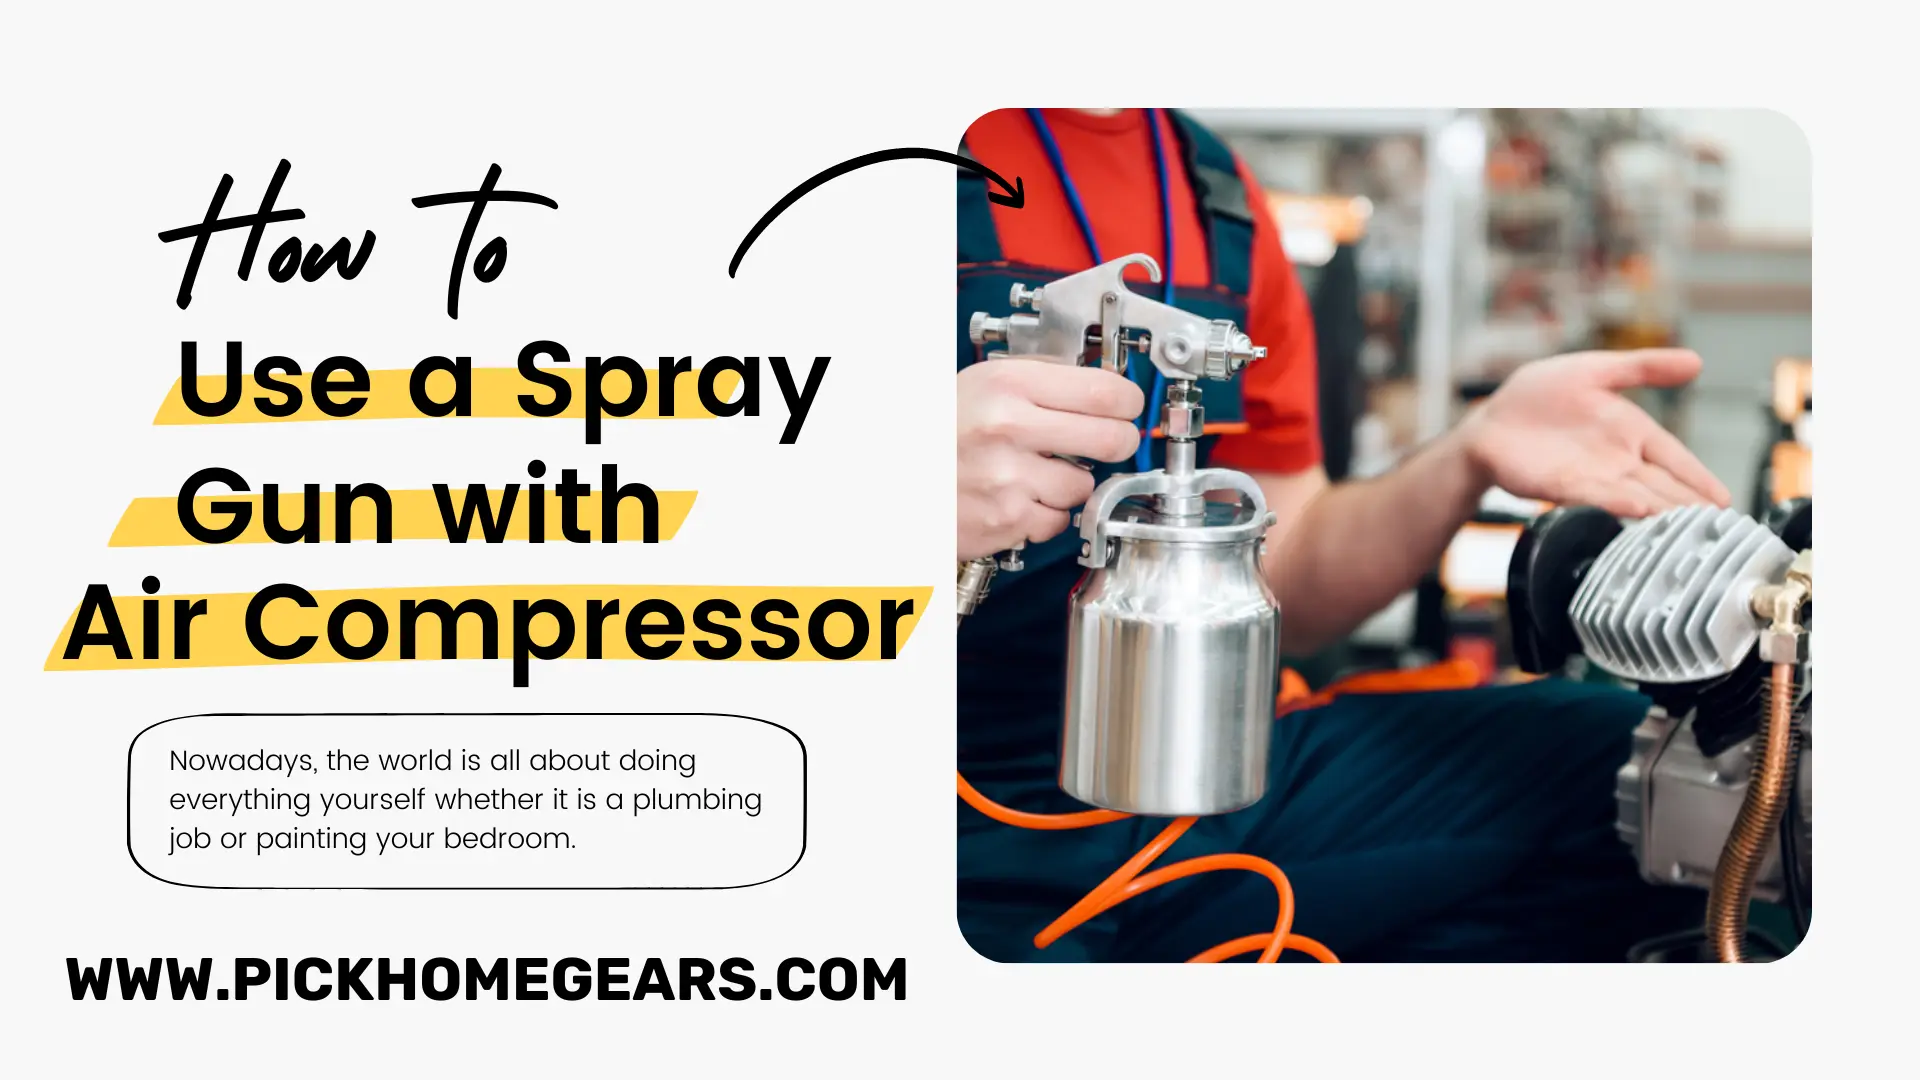 How to Use a Spray Gun with Air Compressor